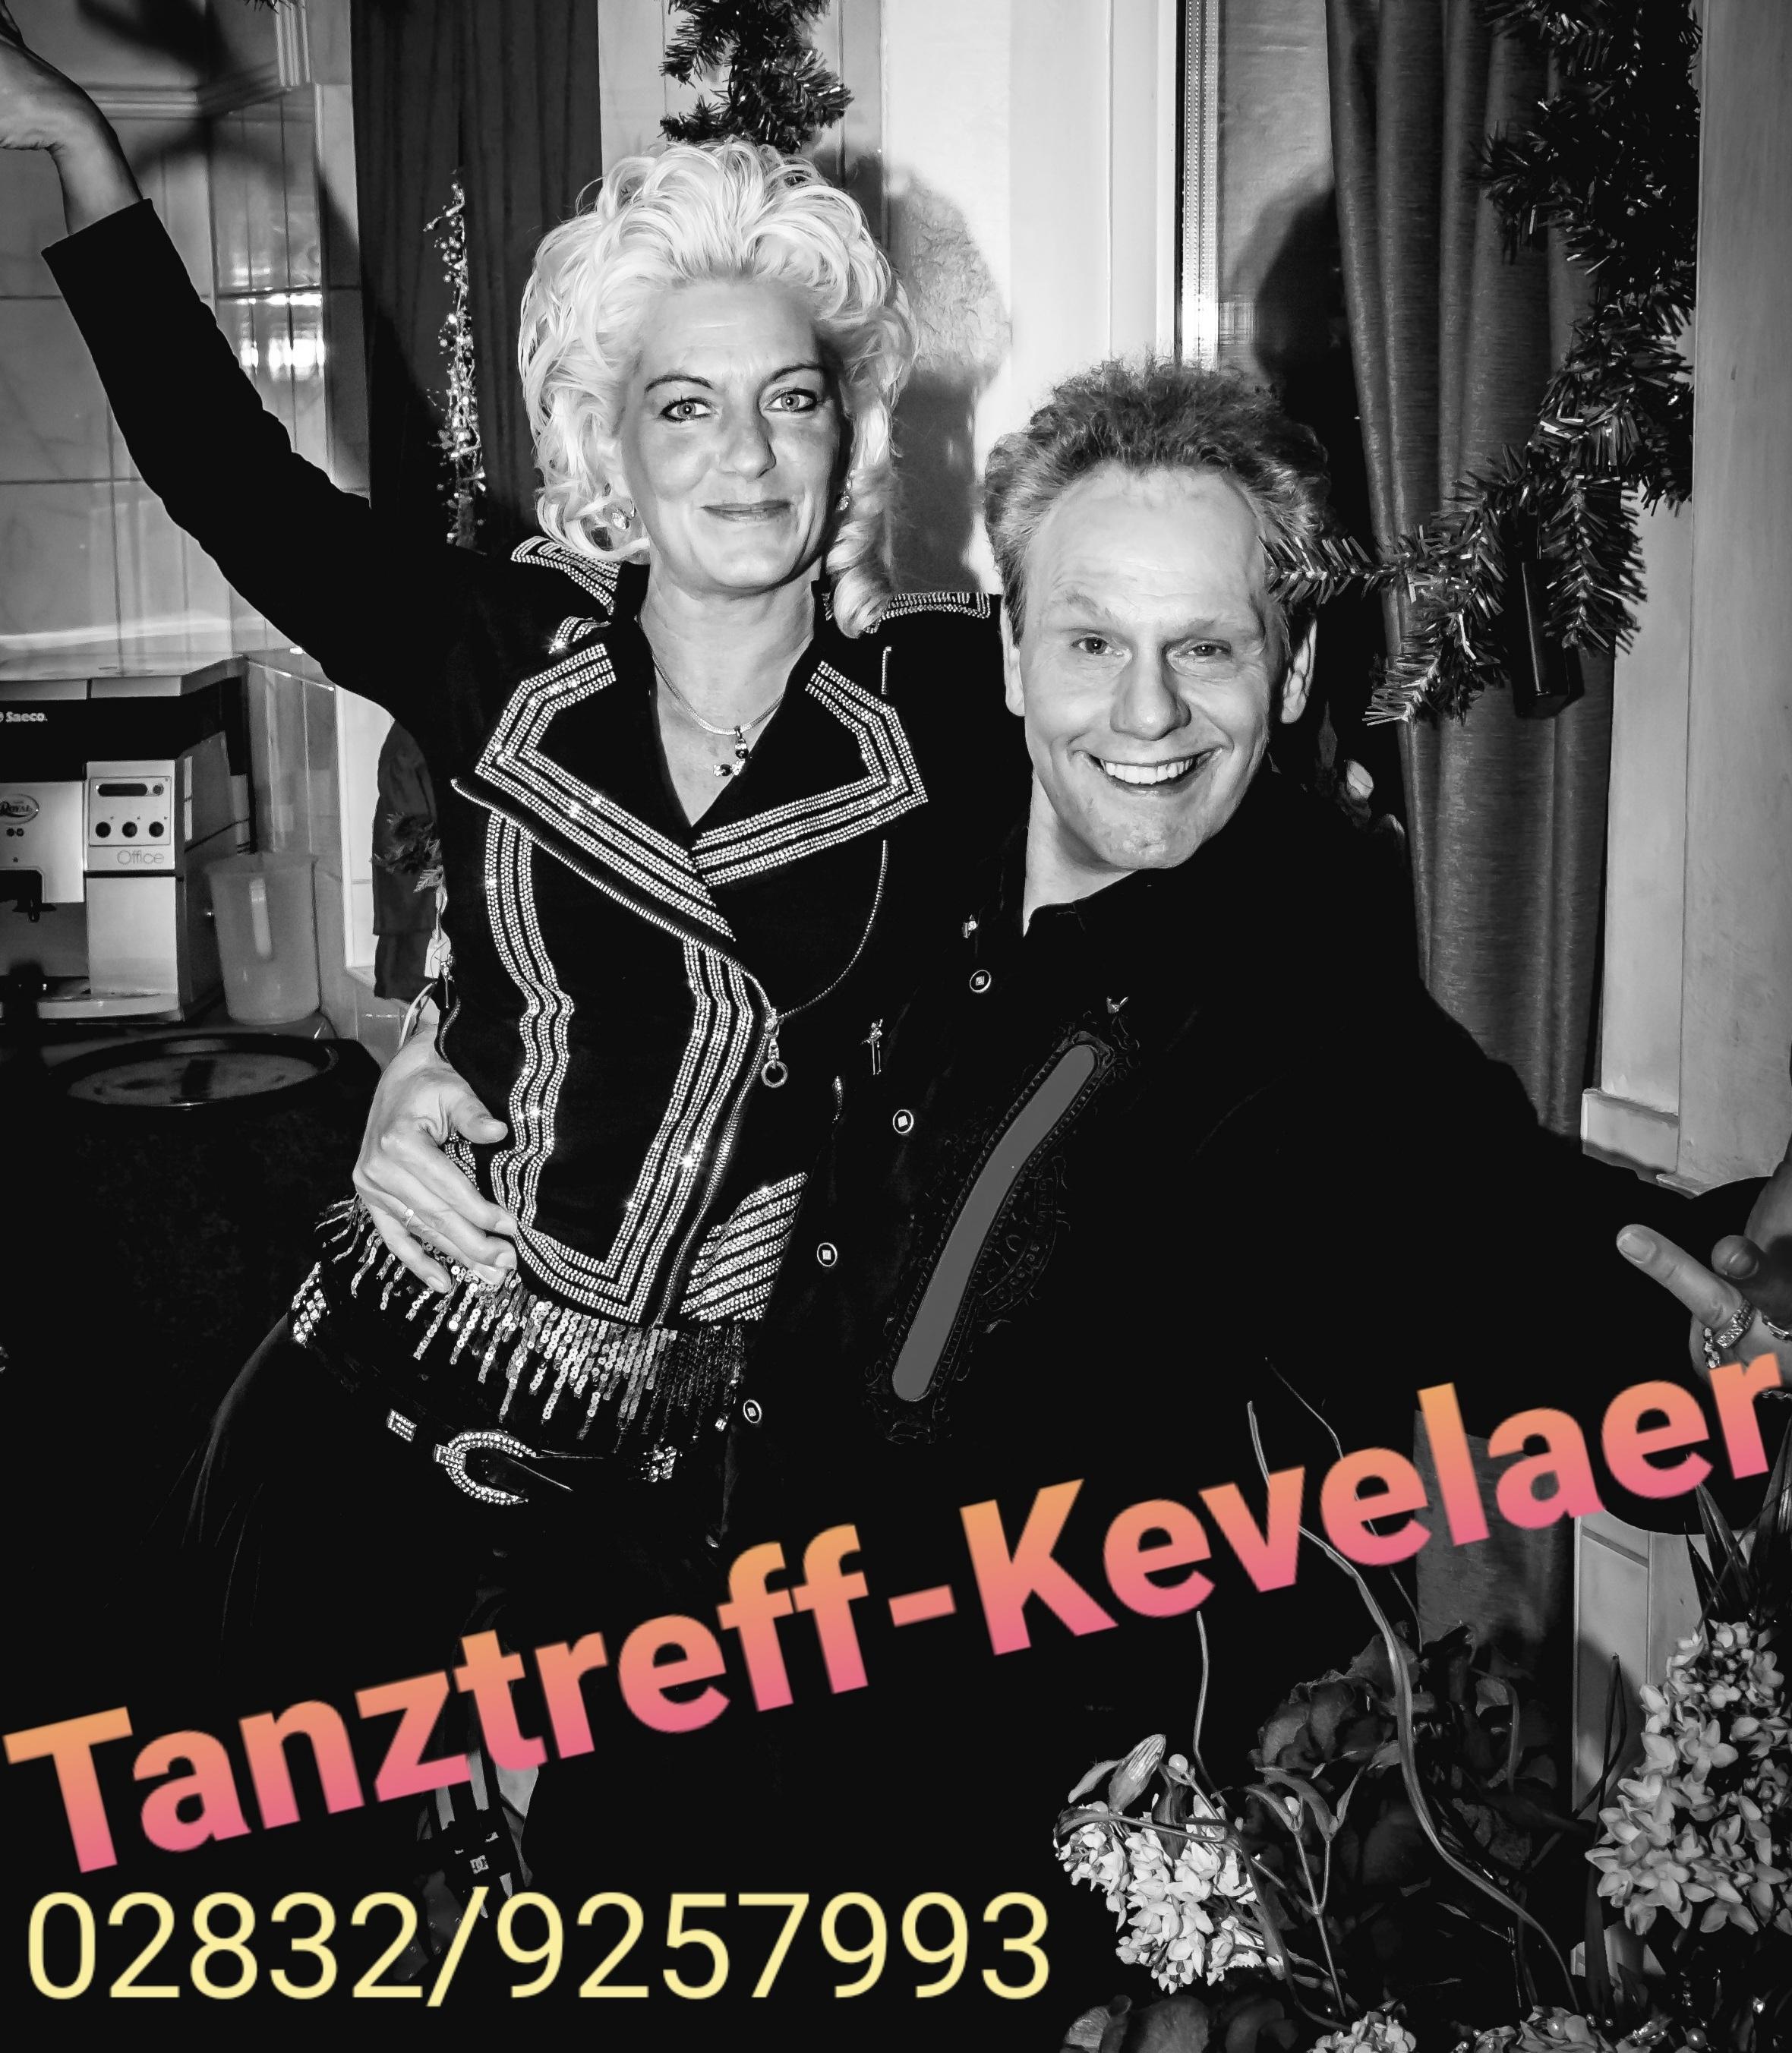 Profile Pictures Tanztreff Kevelaer 